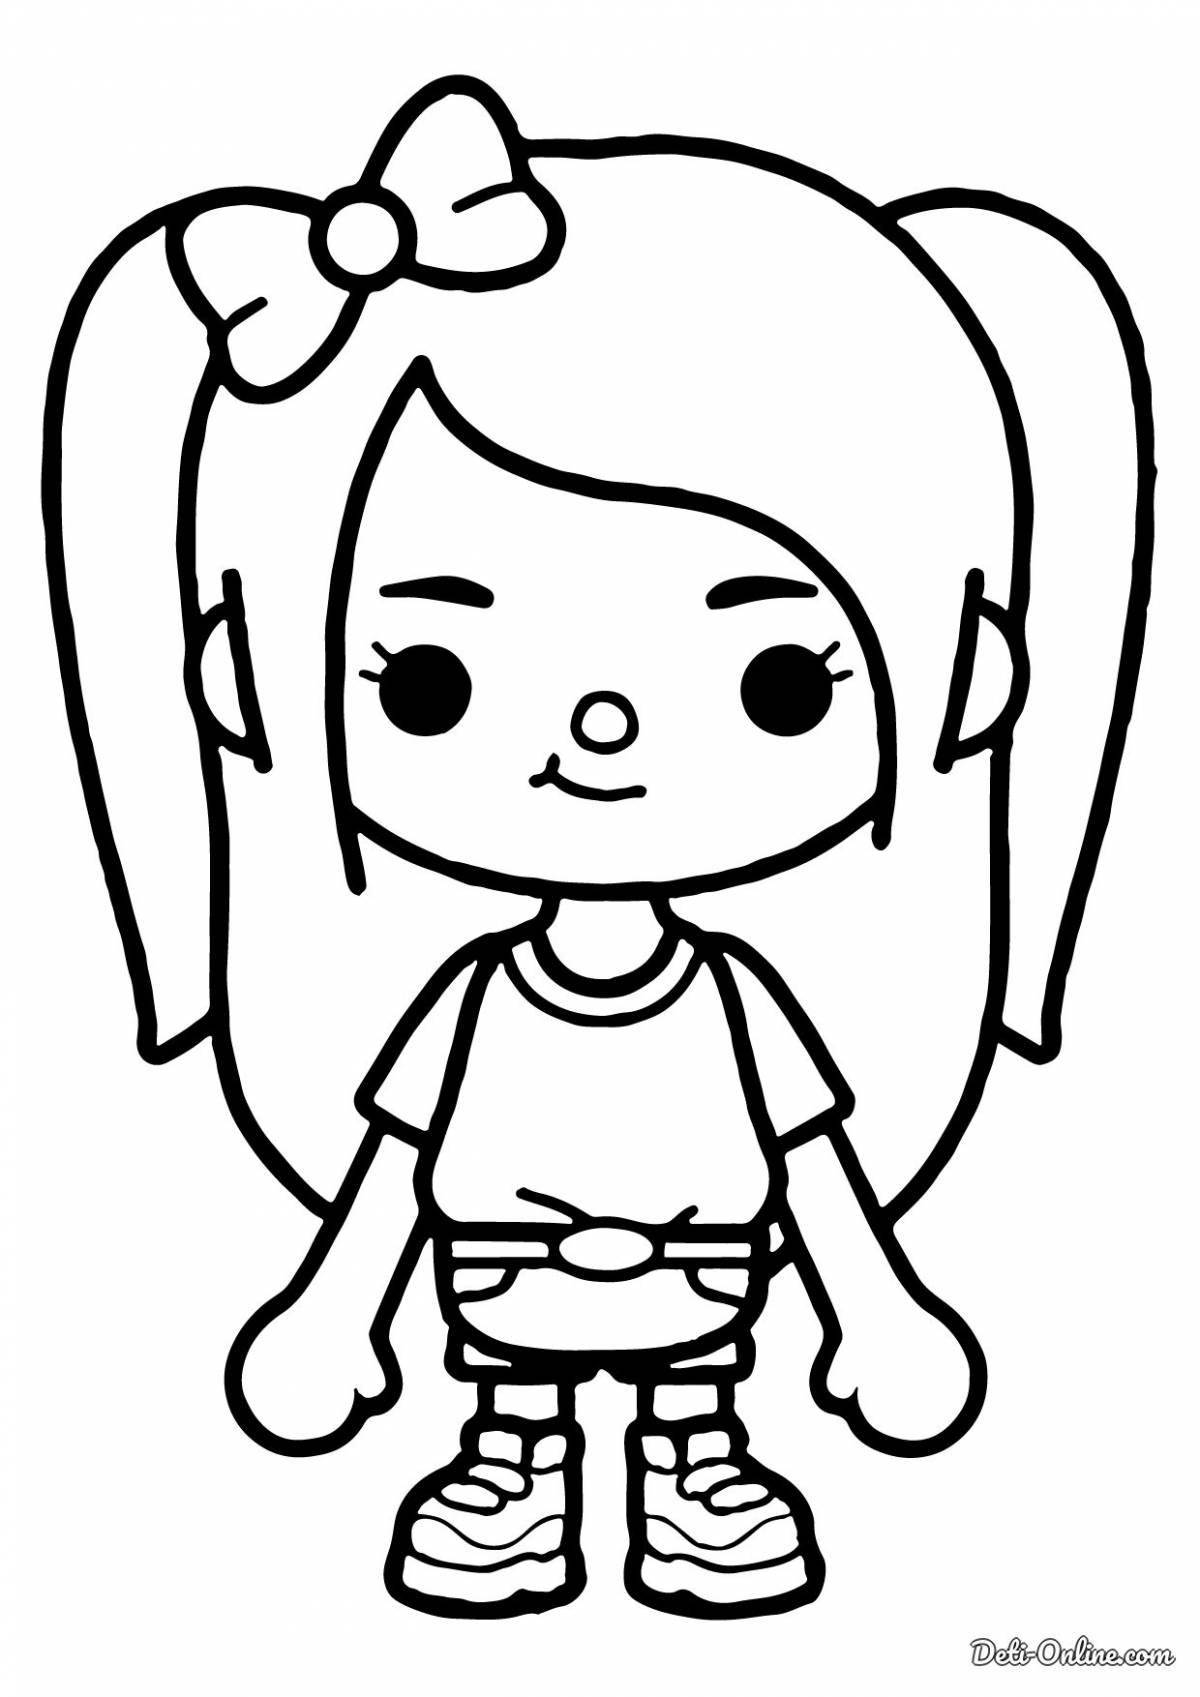 Adorable coloring page of flowing side hair